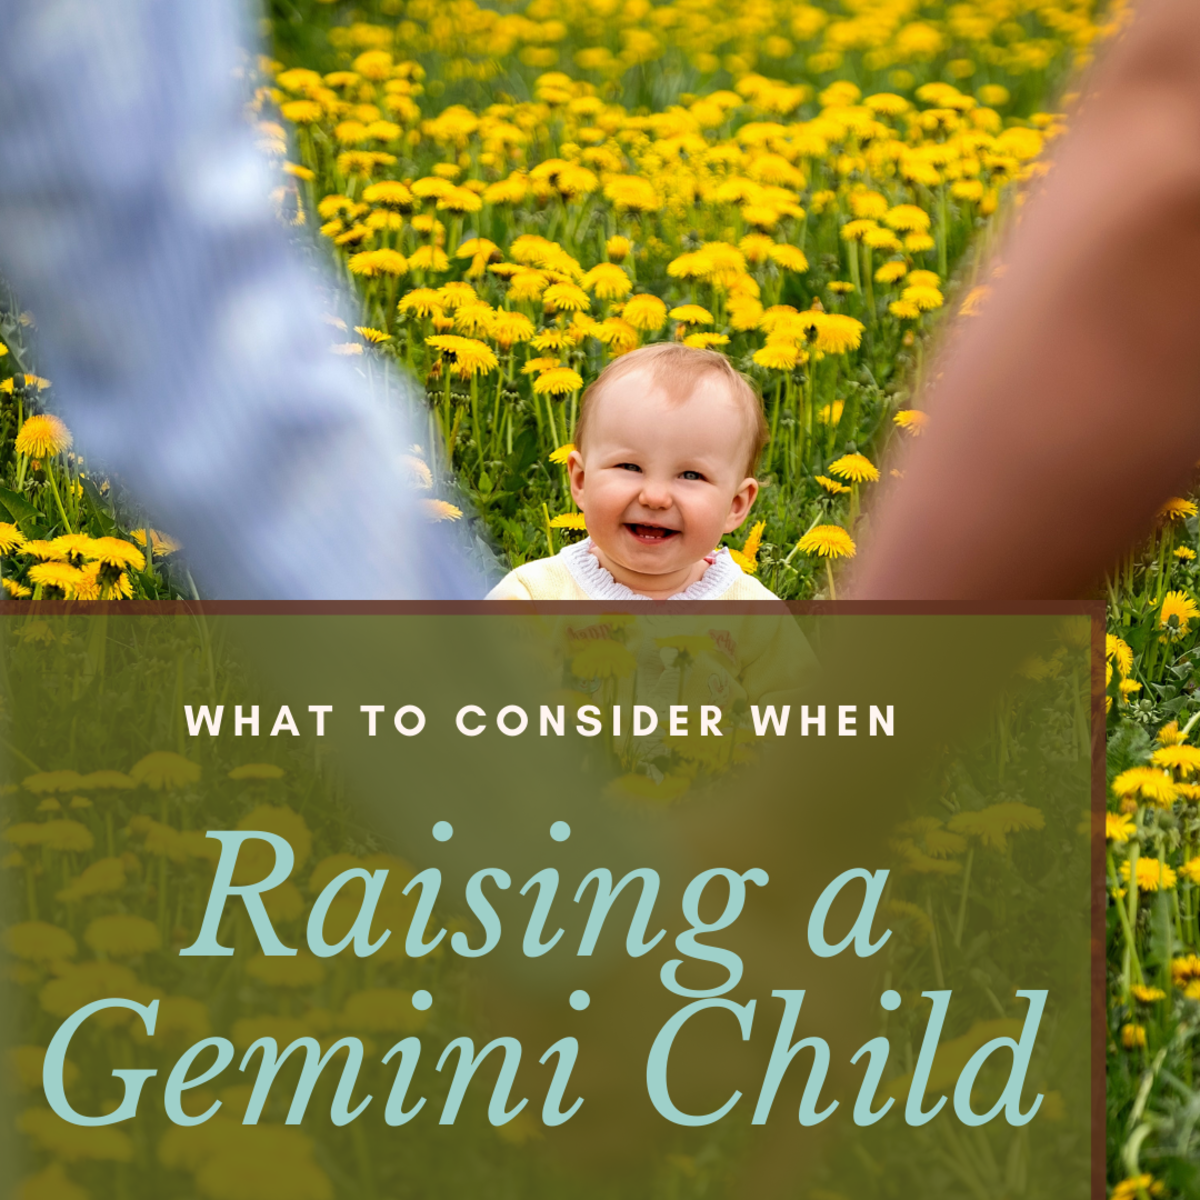 Gemini children carry the energy of the spring—the time of year when they are born. 